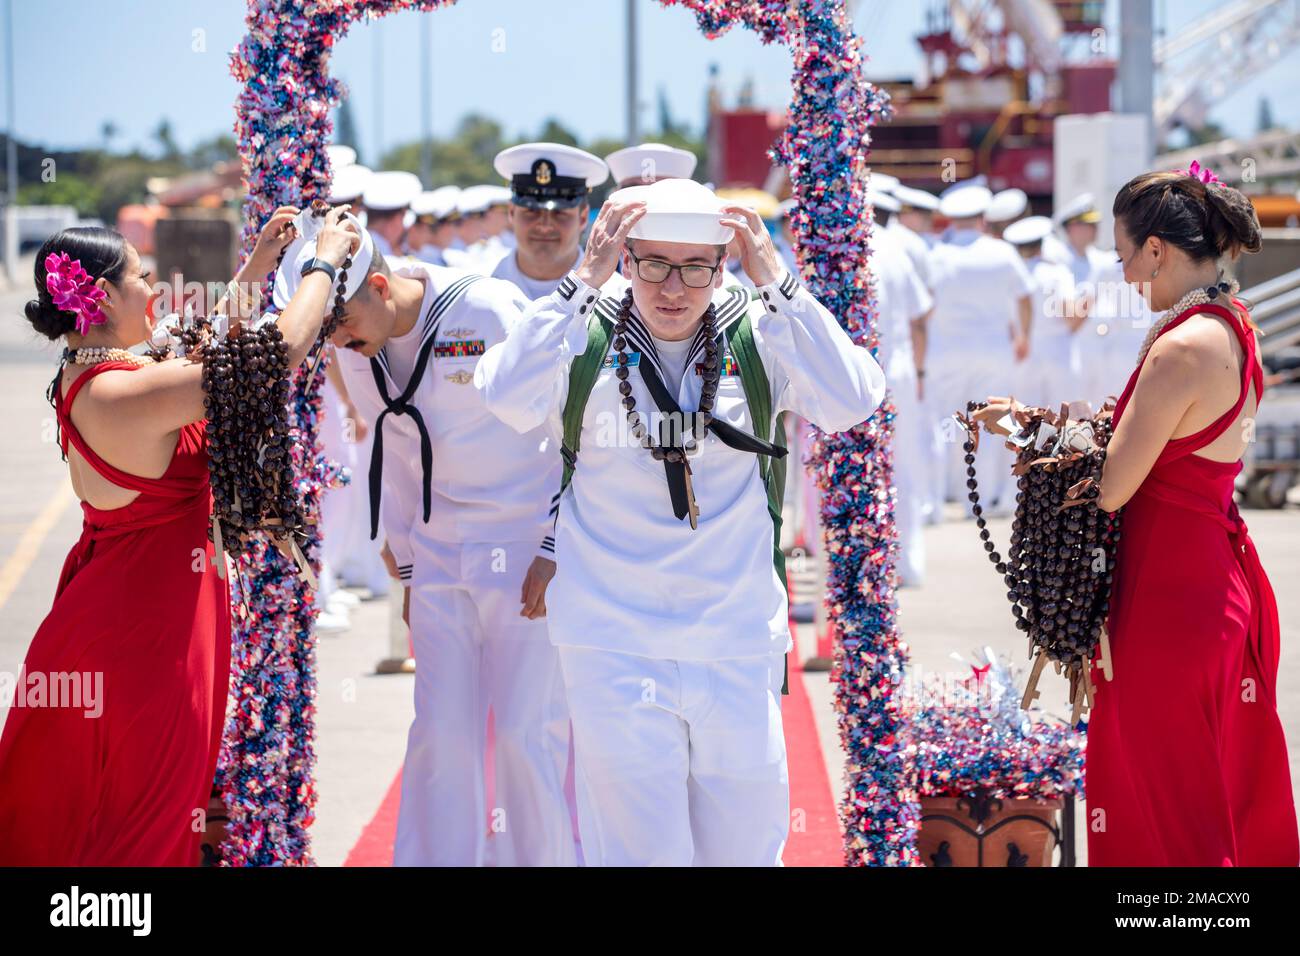 220512-N-XG173-1272 JOINT BASE PEARL HARBOR-HICKAM (May. 25, 2022) Machinists Mate (Nuclear) 2nd Class Jon Tedder, from Atlanta, assigned to the Virginia-class fast-attack submarine USS North Carolina (SSN 777) returns home after the boat returns to Joint Base Pearl Harbor-Hickam from deployment in the 7th Fleet area of responsibility.The Virginia-class fast-attack submarine USS North Carolina (SSN 777) returns to Joint Base Pearl Harbor-Hickam from deployment in the 7th Fleet area of responsibility. North Carolina performed a full spectrum of operations, including anti-submarine and anti-surf Stock Photo